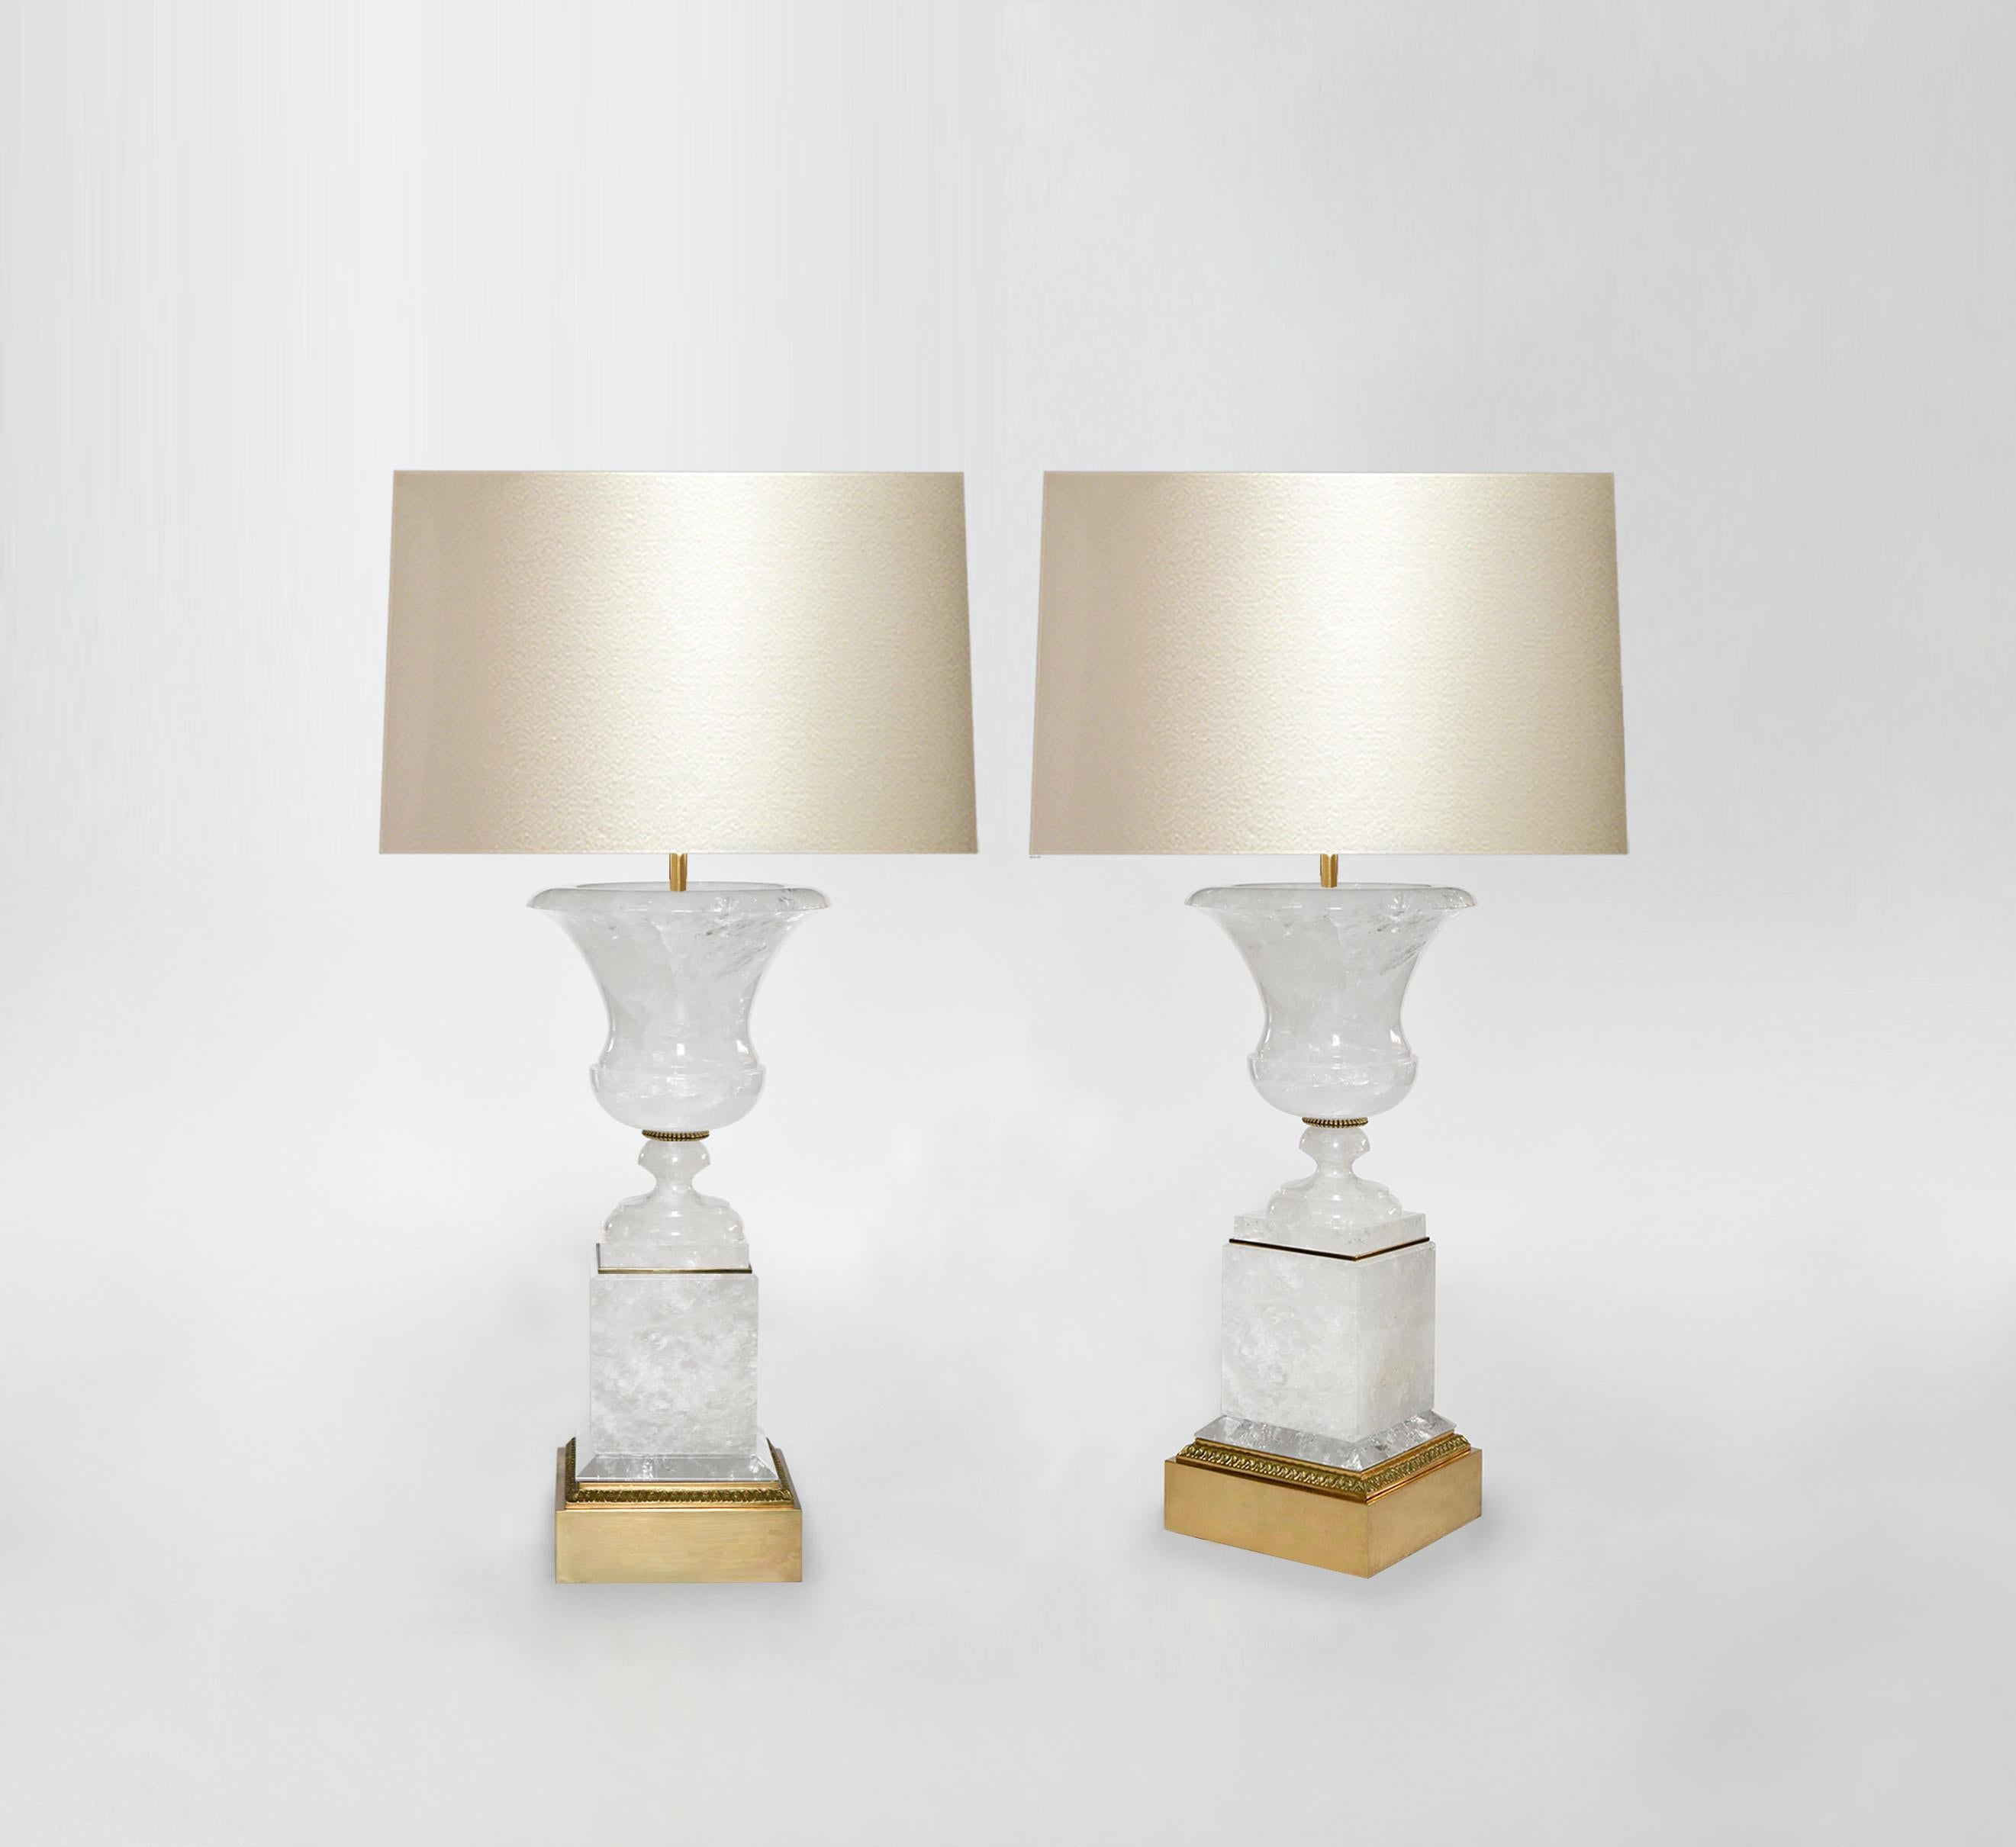 Pair of classic urn form rock crystal lamps with fine cast brass decoration.
To the top of rack crystal: 18